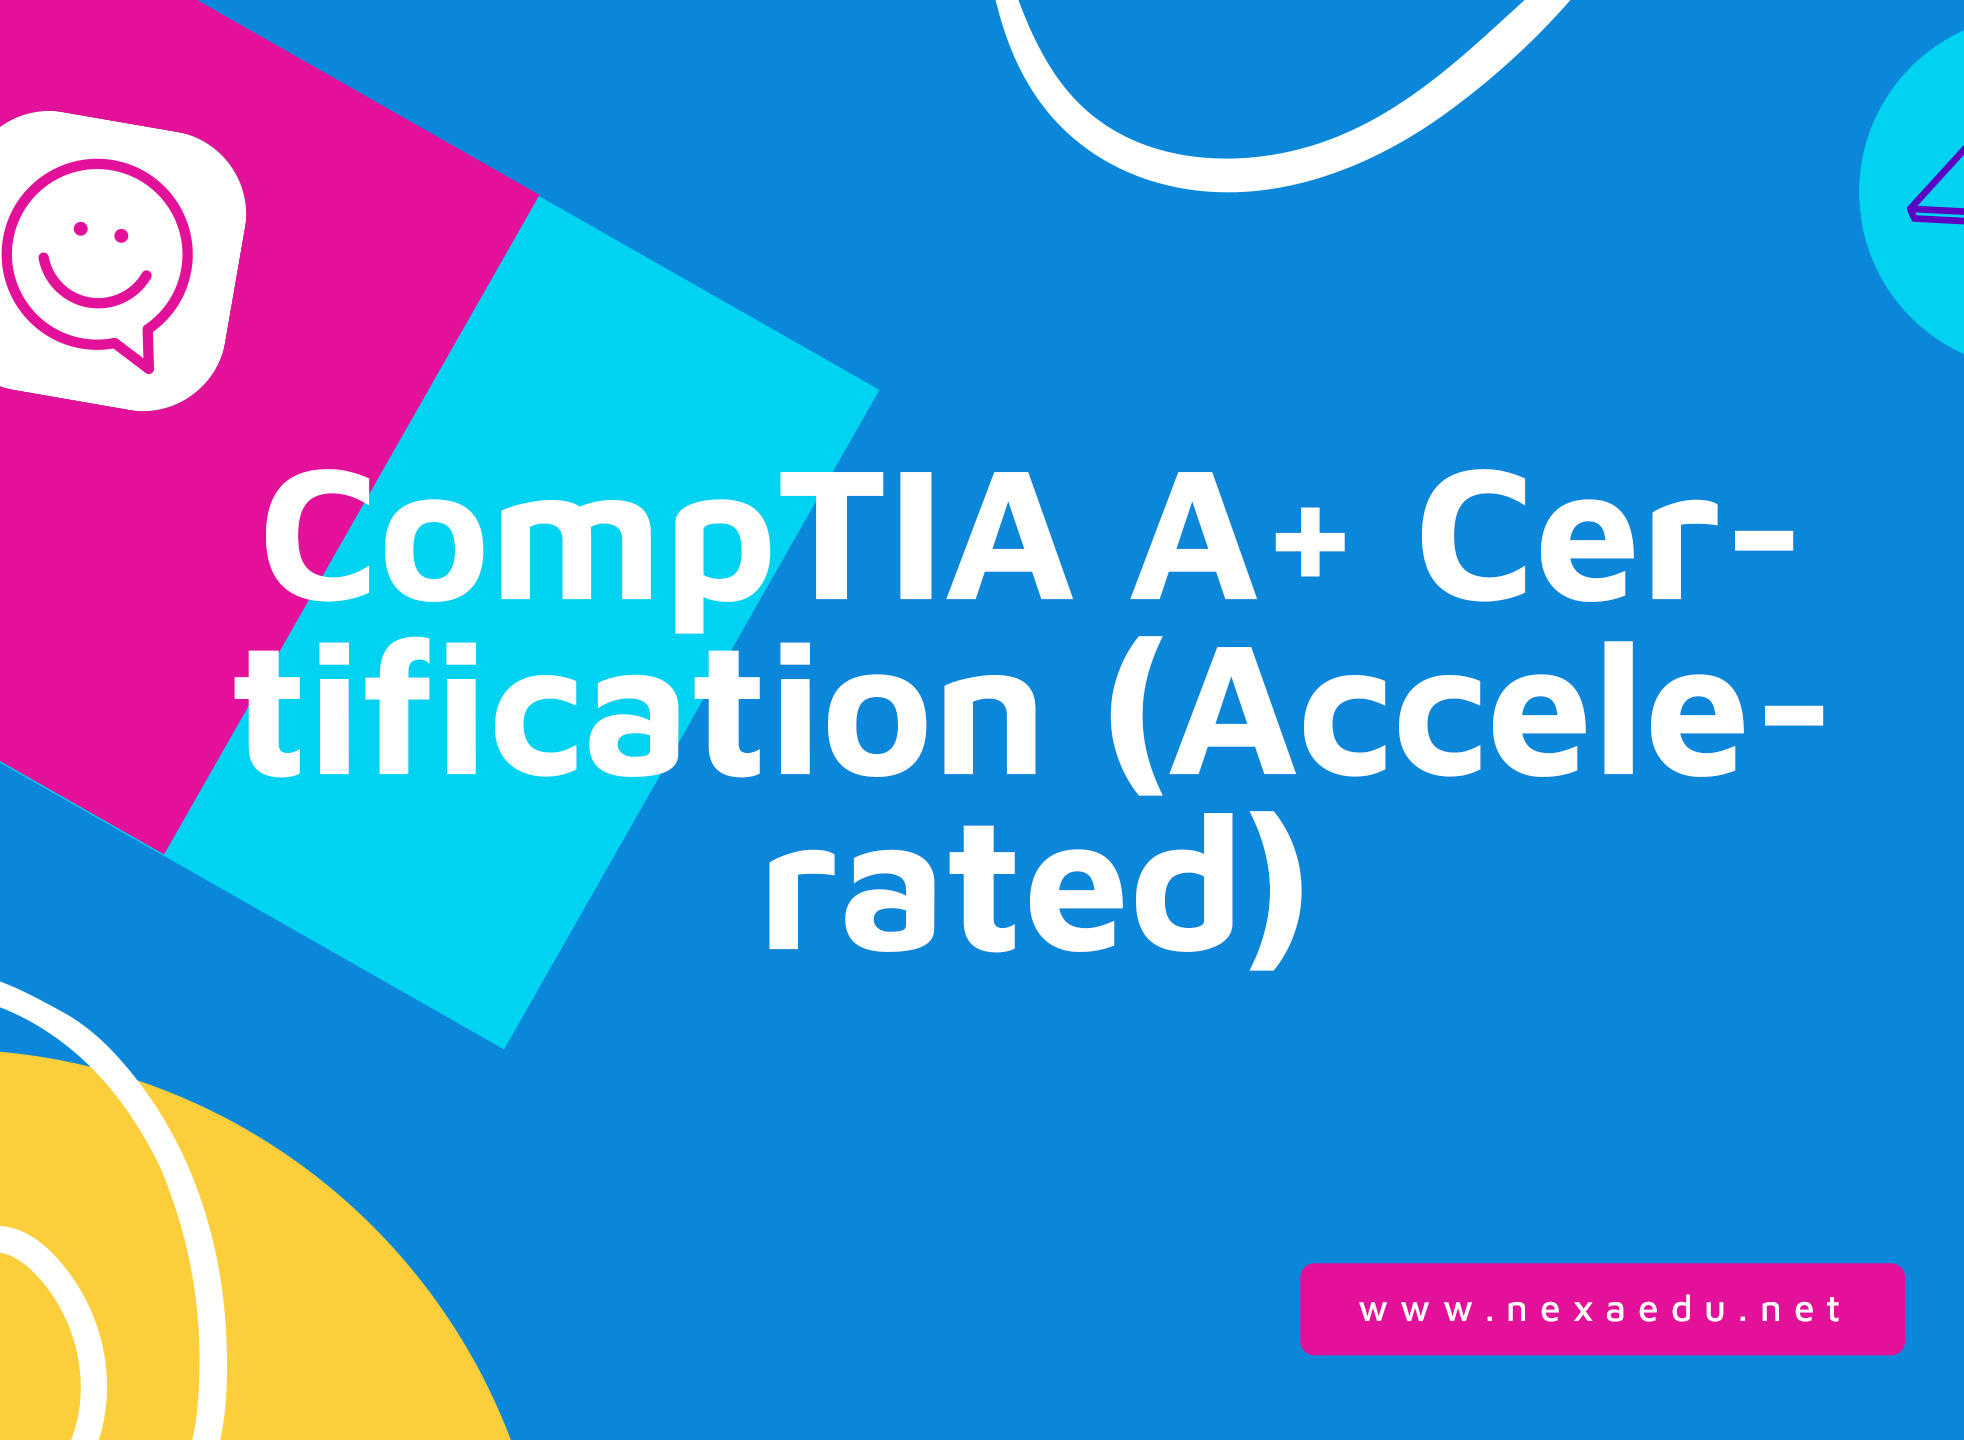 CompTIA A+ Certification (Accelerated)